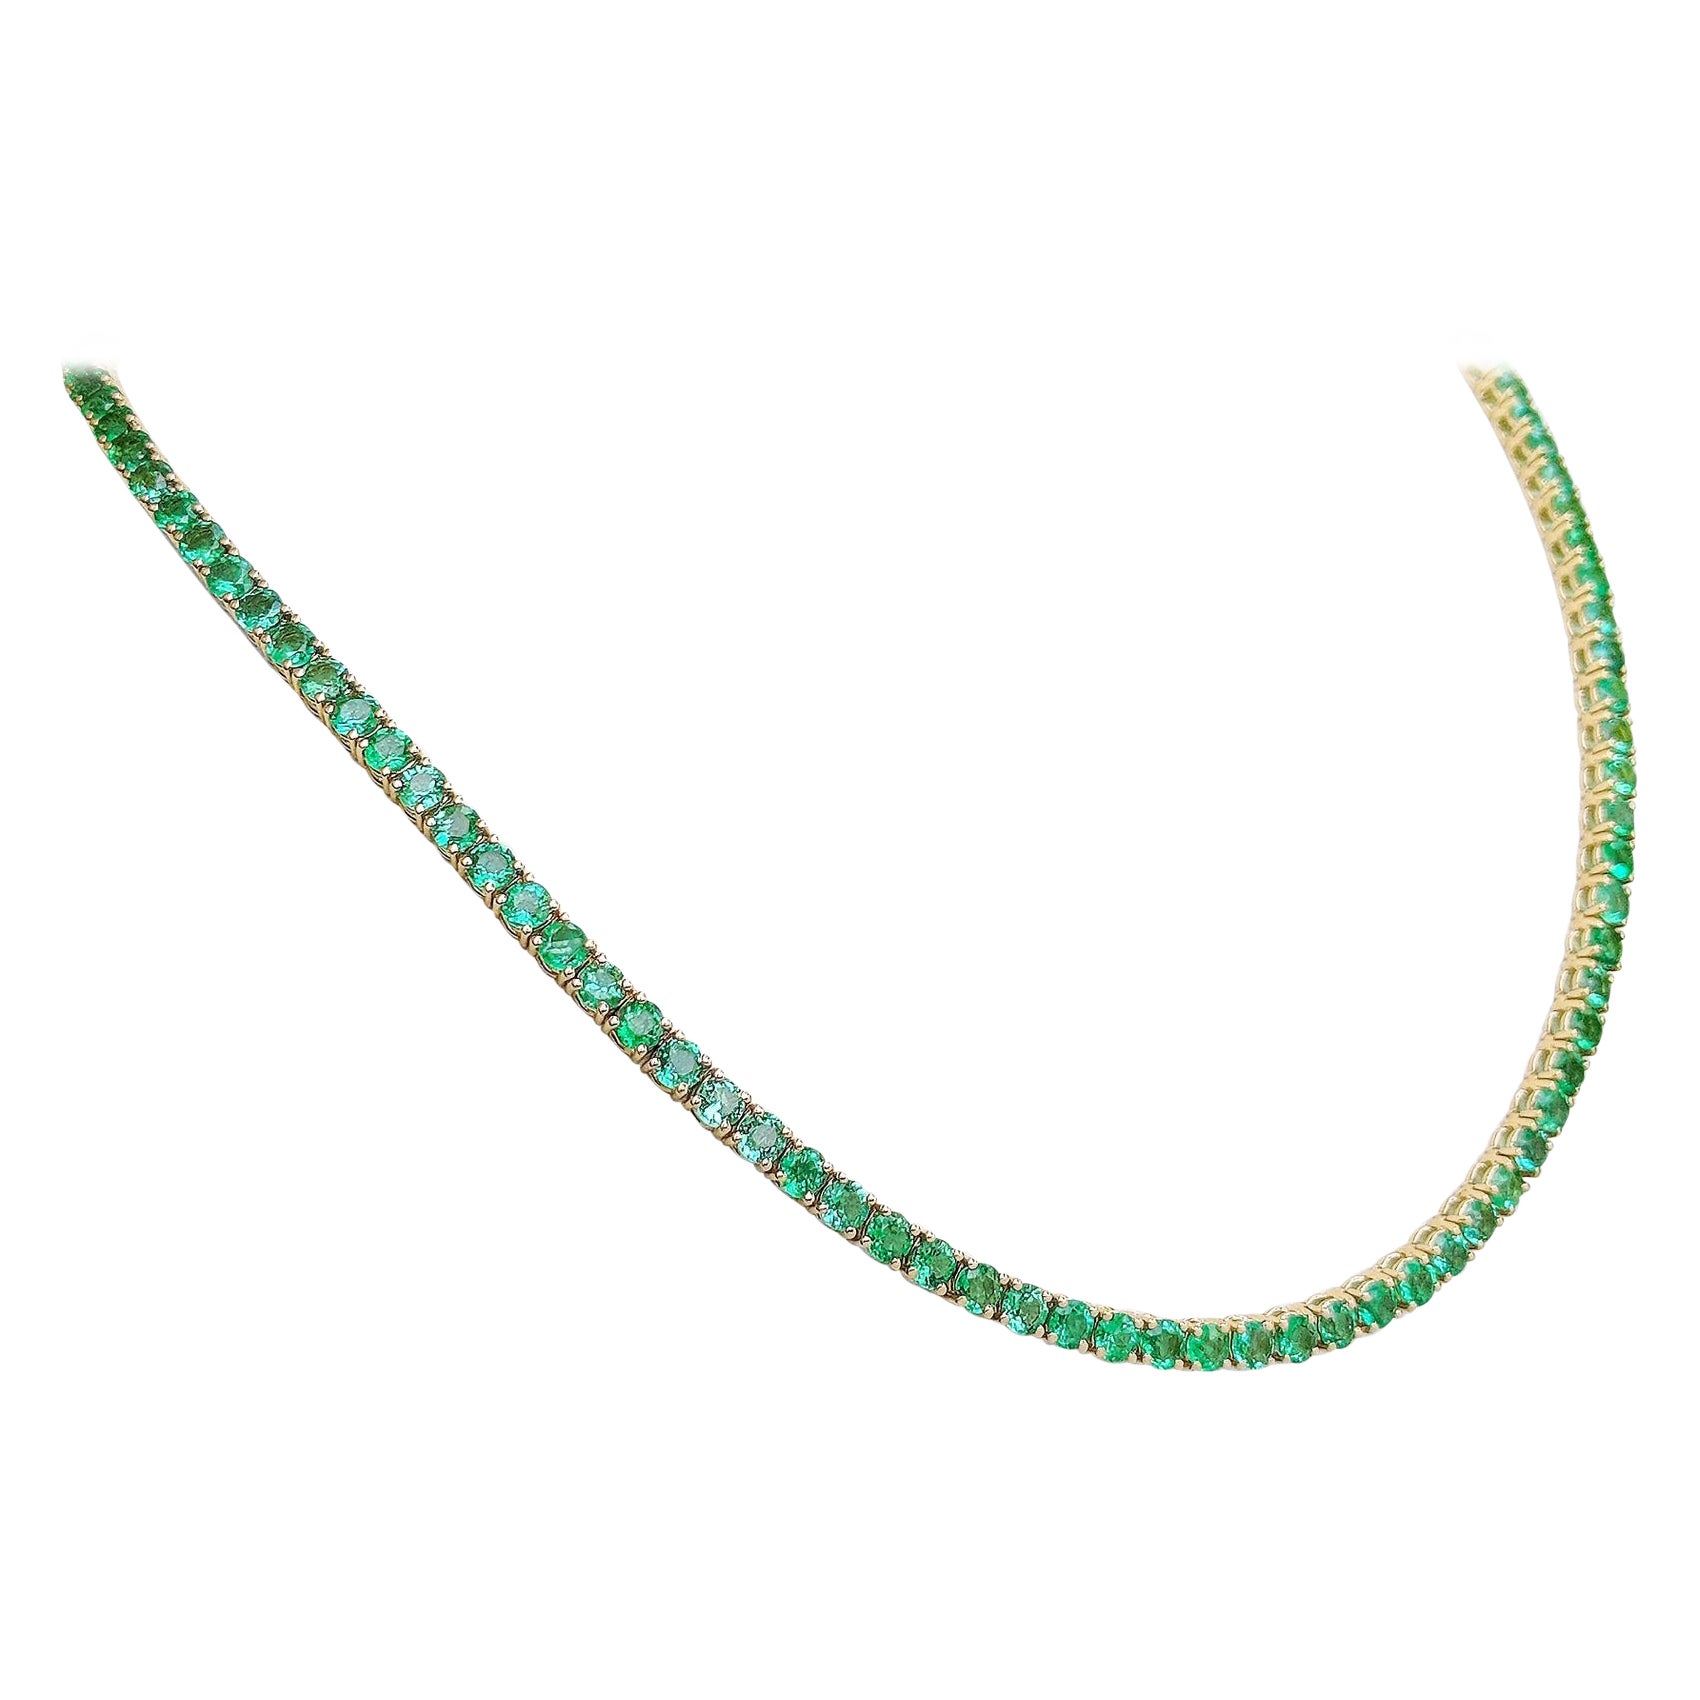 NO RESERVE! 27.79 Carat Natural Emerald Riviera - 14 kt. Gold - Necklace For Sale